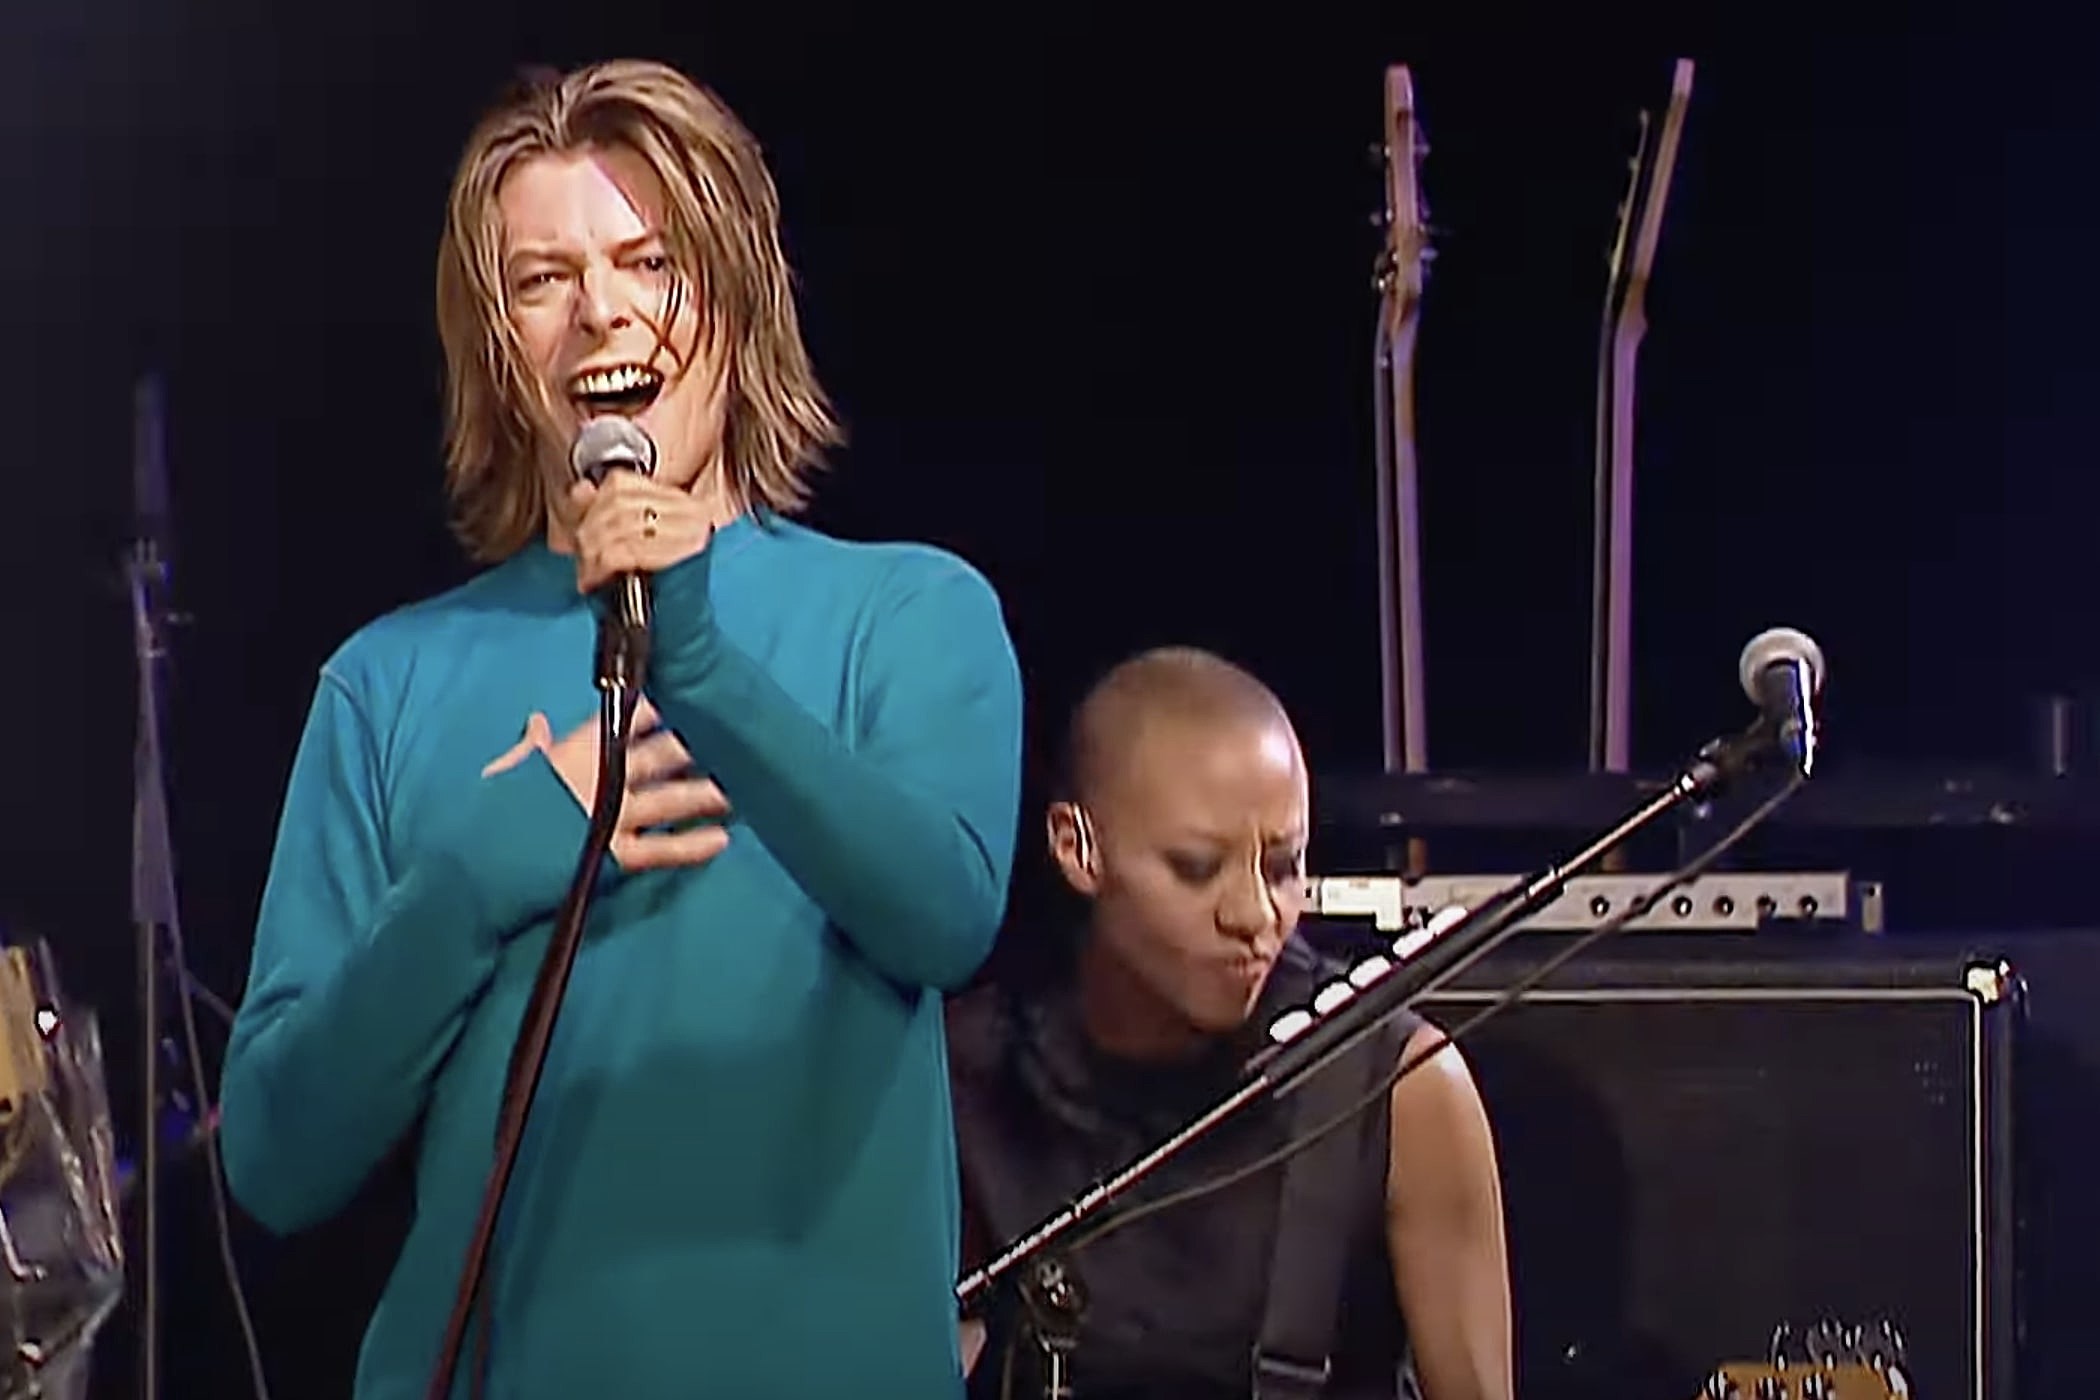 David Bowie Returns to Early Single in Newly Unearthed Live Video